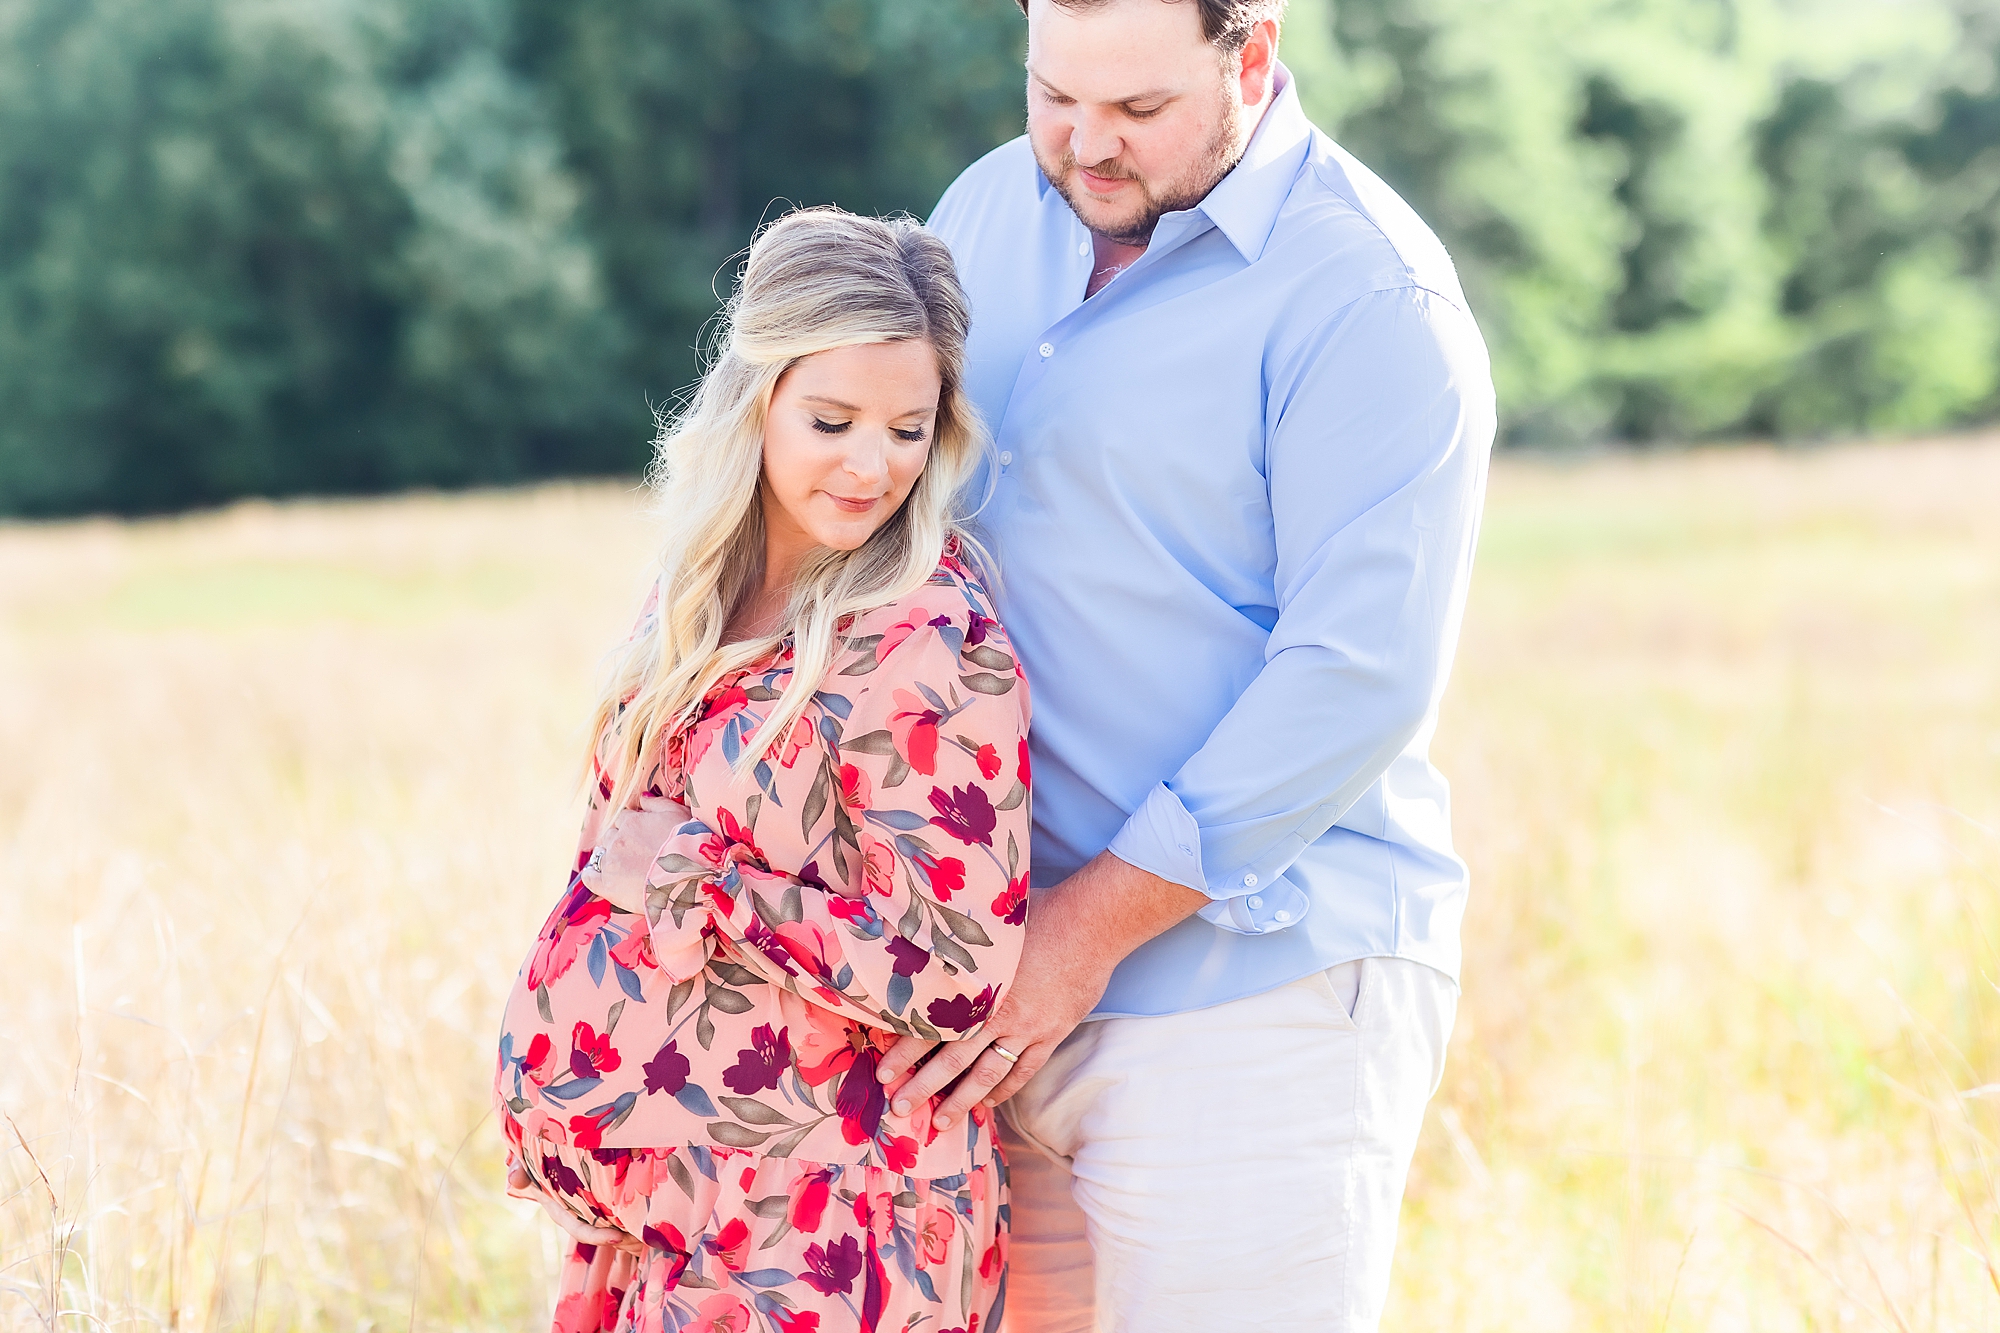 expecting parents hold mom's bump during photos in field